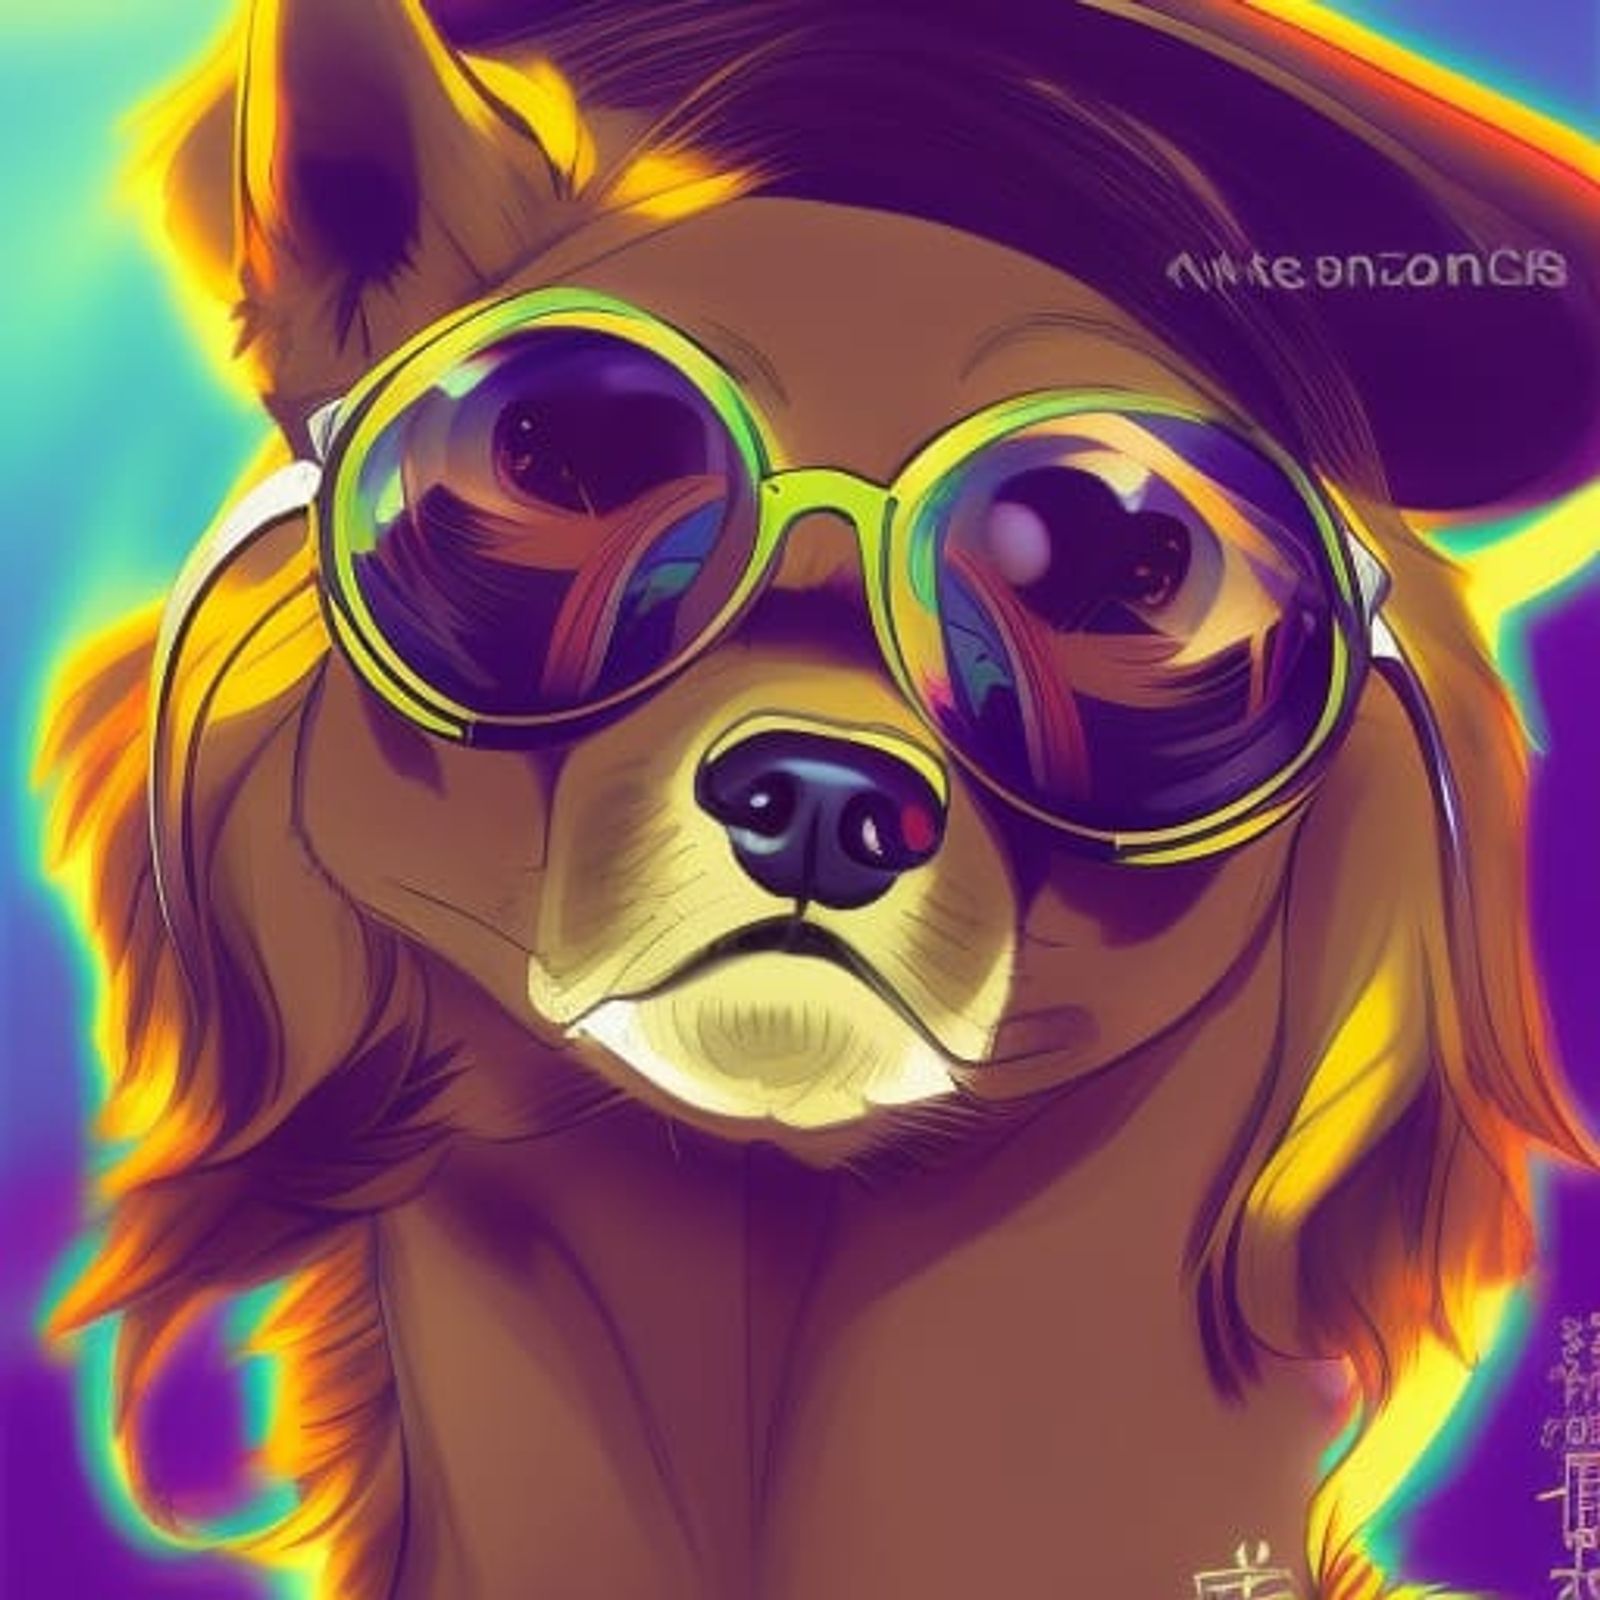 doge with sunglasses